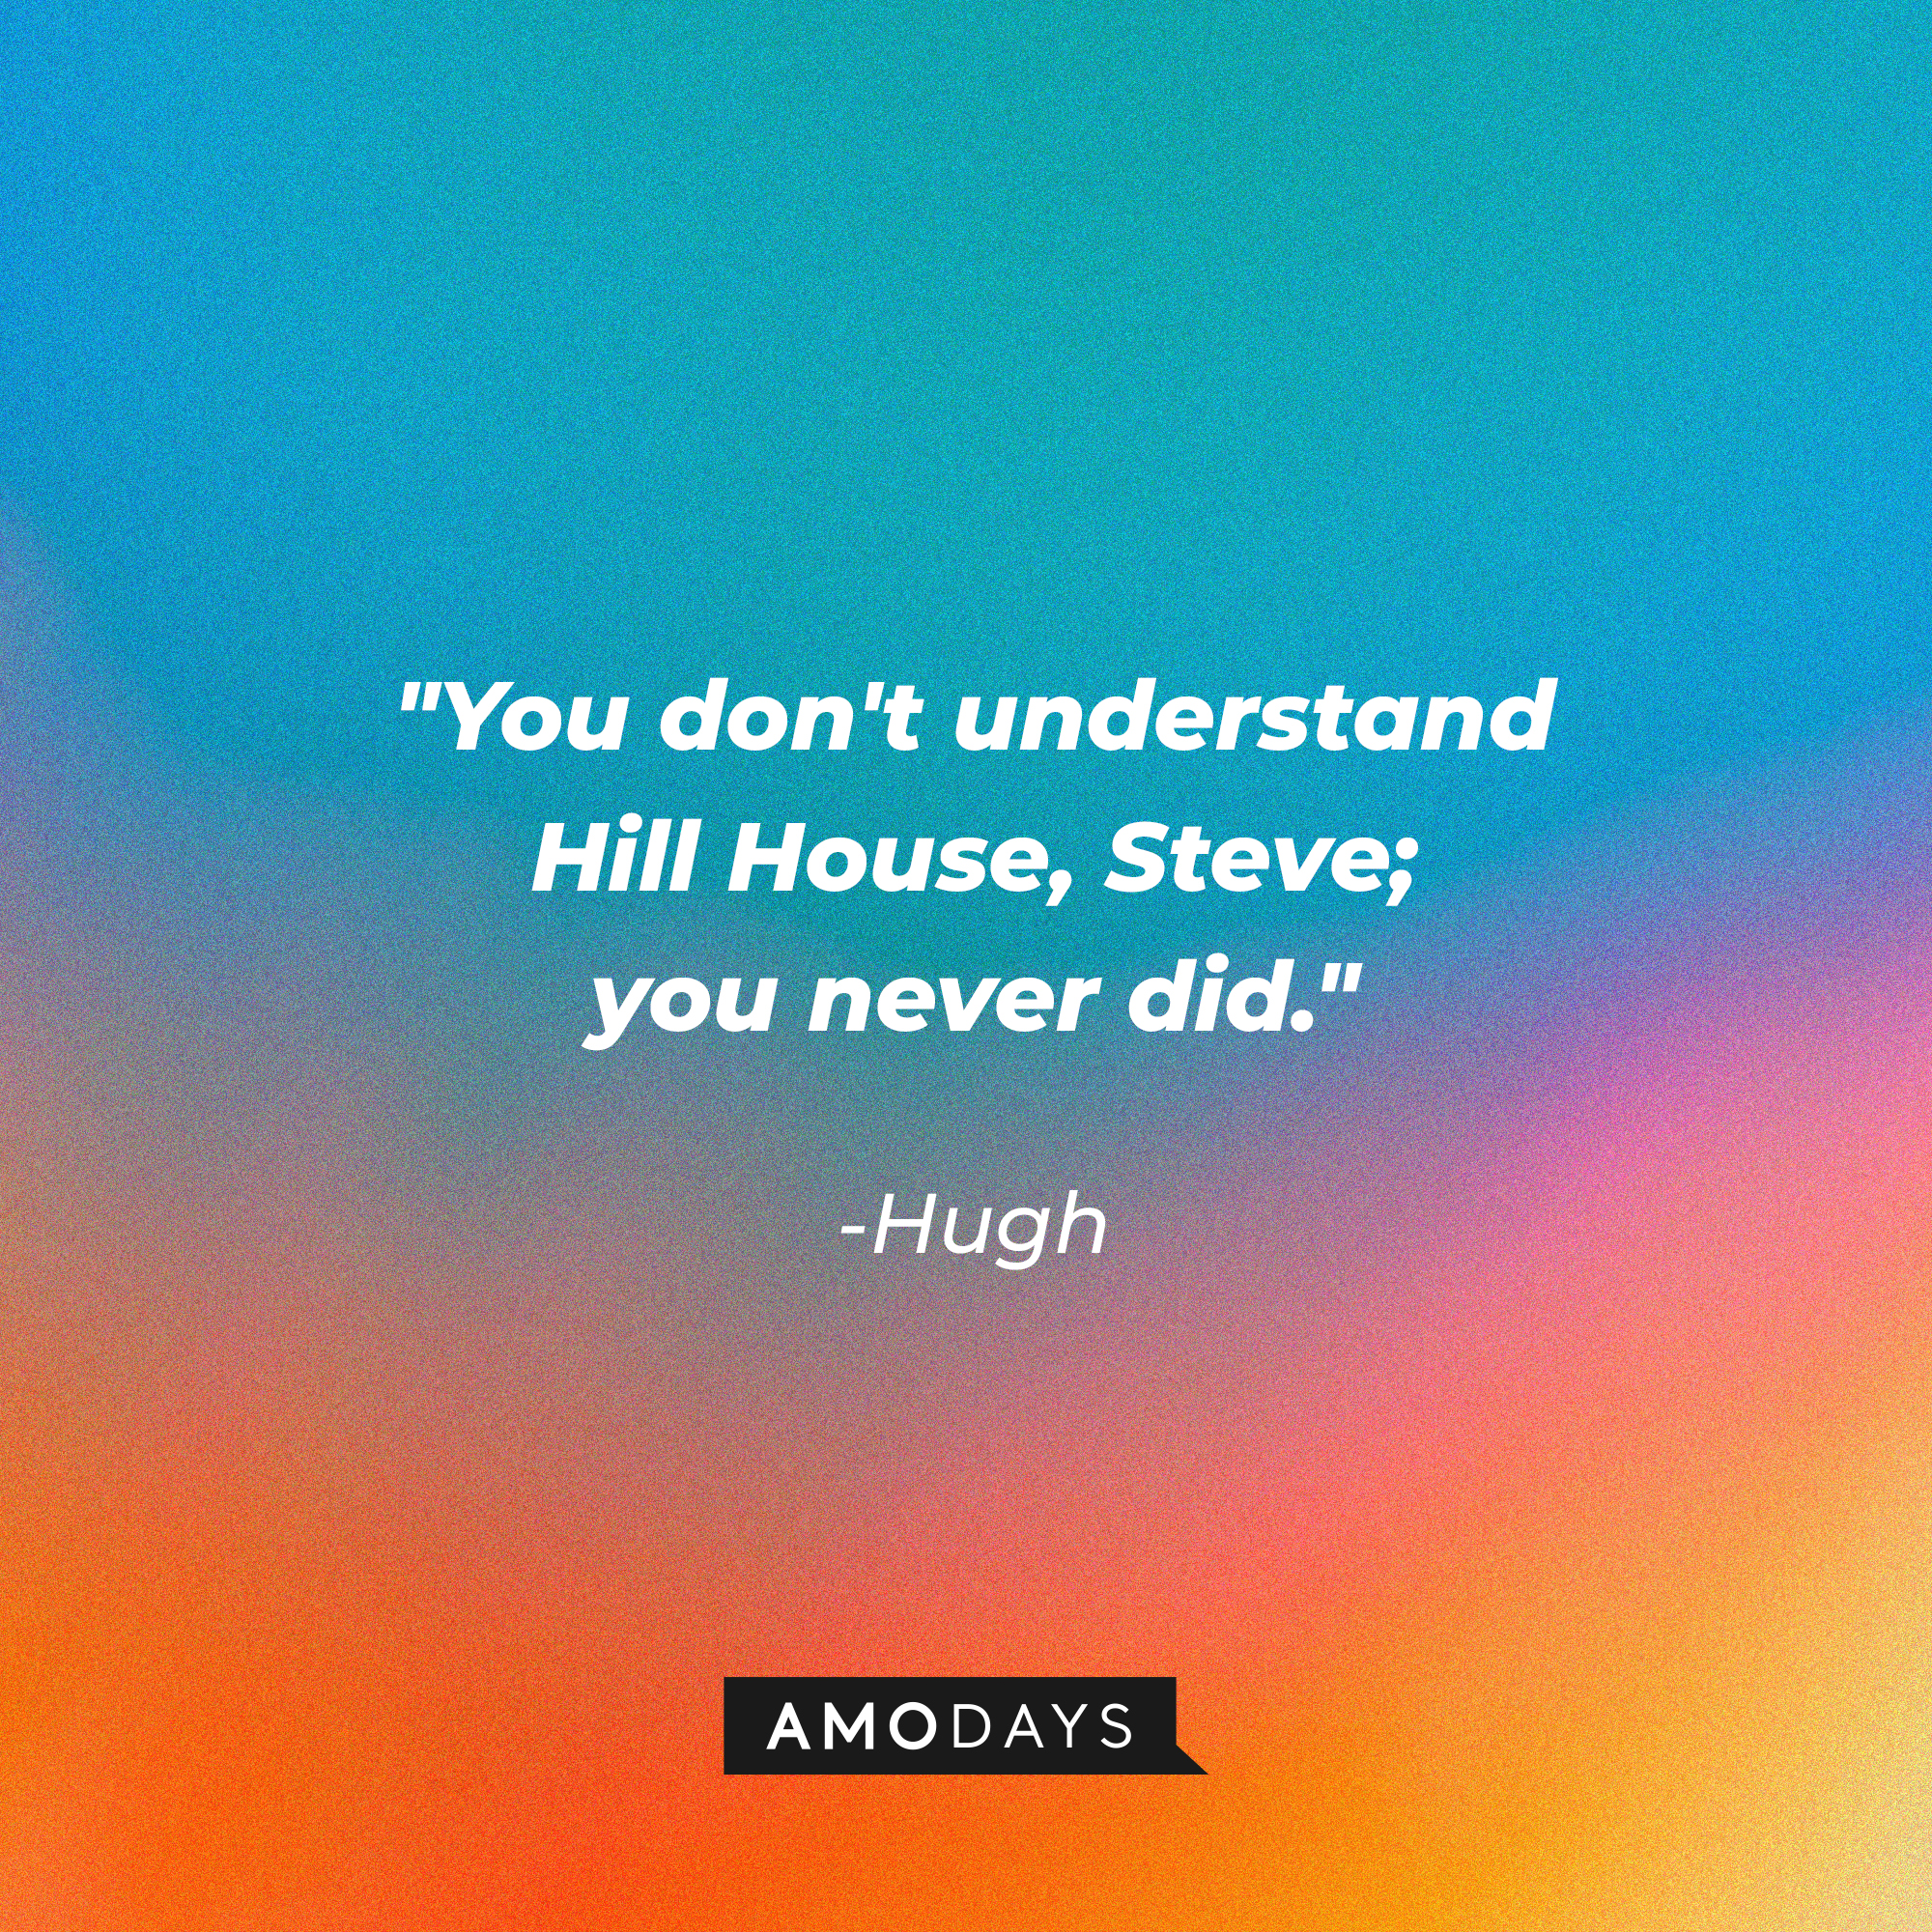 Hugh's quote: "You don't understand Hill House, Steve; you never did." | Image: AmoDays